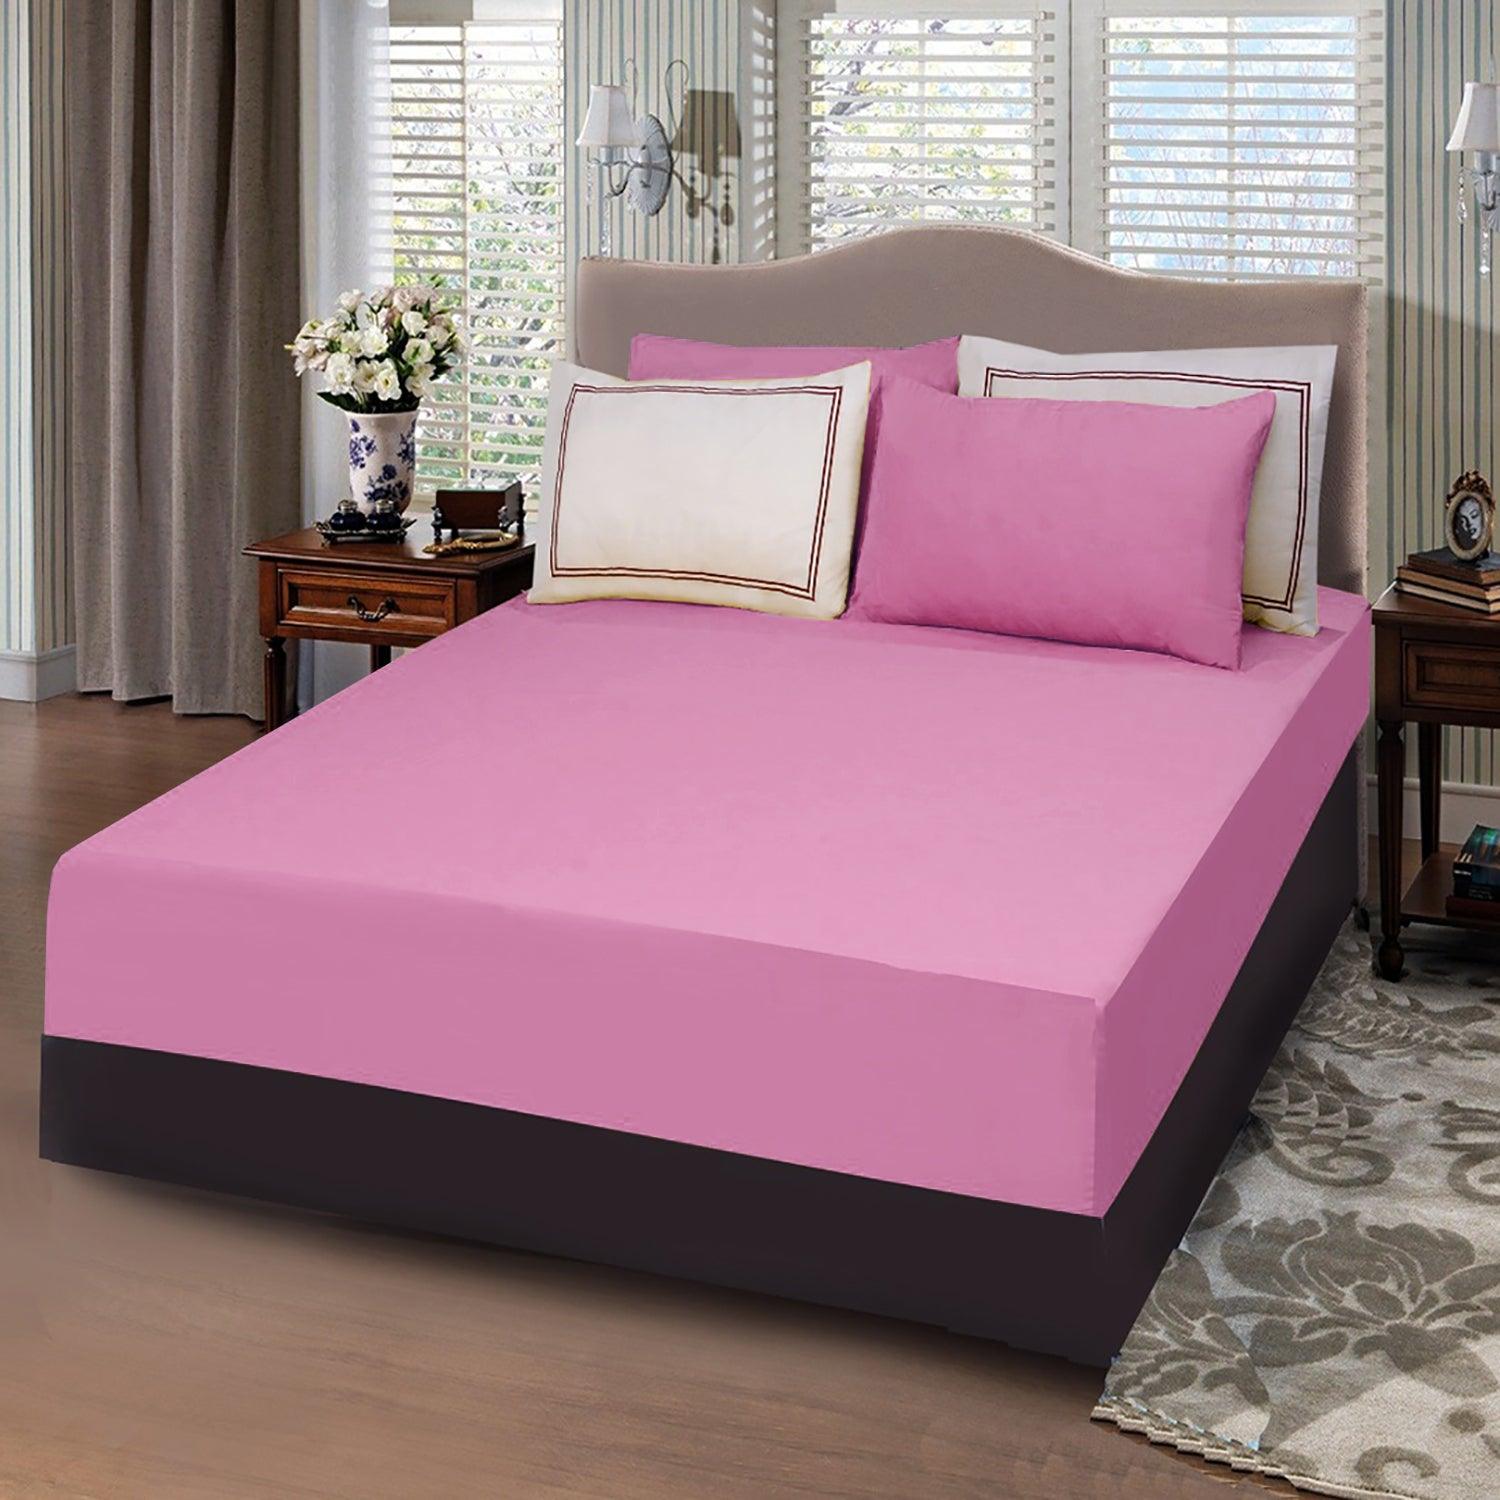 5 Pc's Baratta Stitched Fitted Sheet Set Baby Pink - 92Bedding